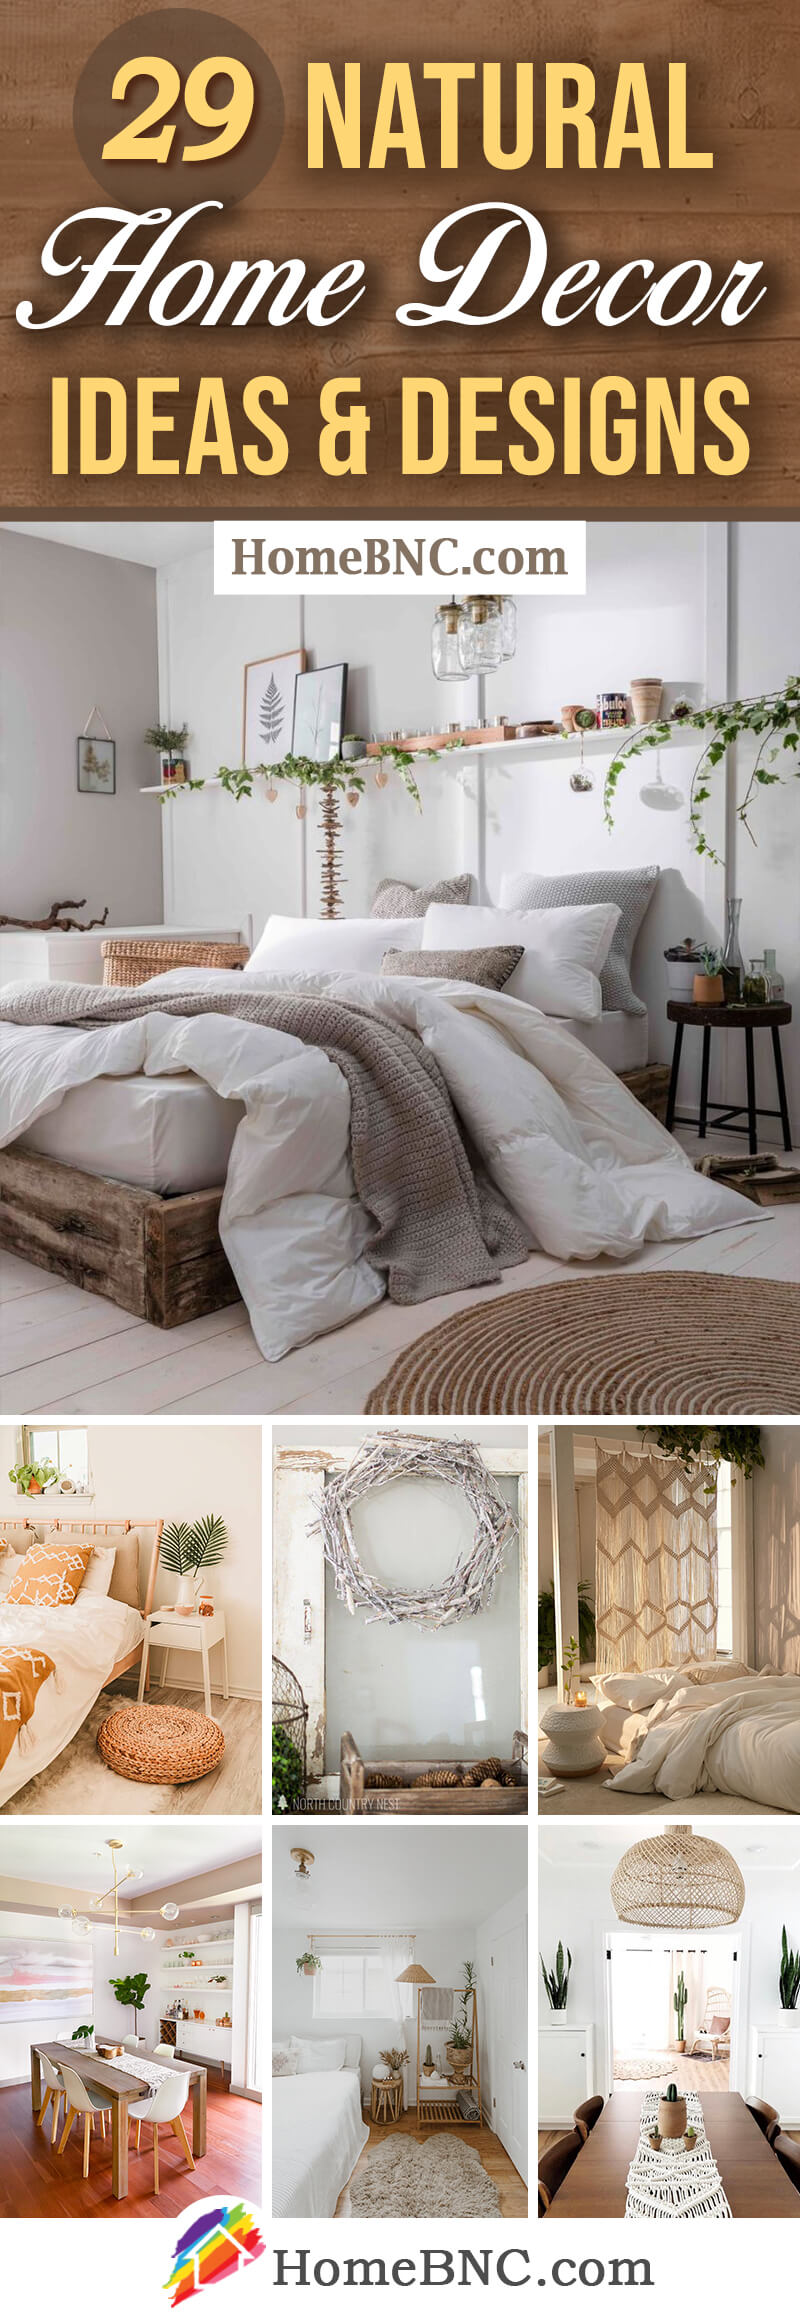 29 Best Natural Home Decor Ideas For Every Room In 2021 - Chic Home Decor Ideas